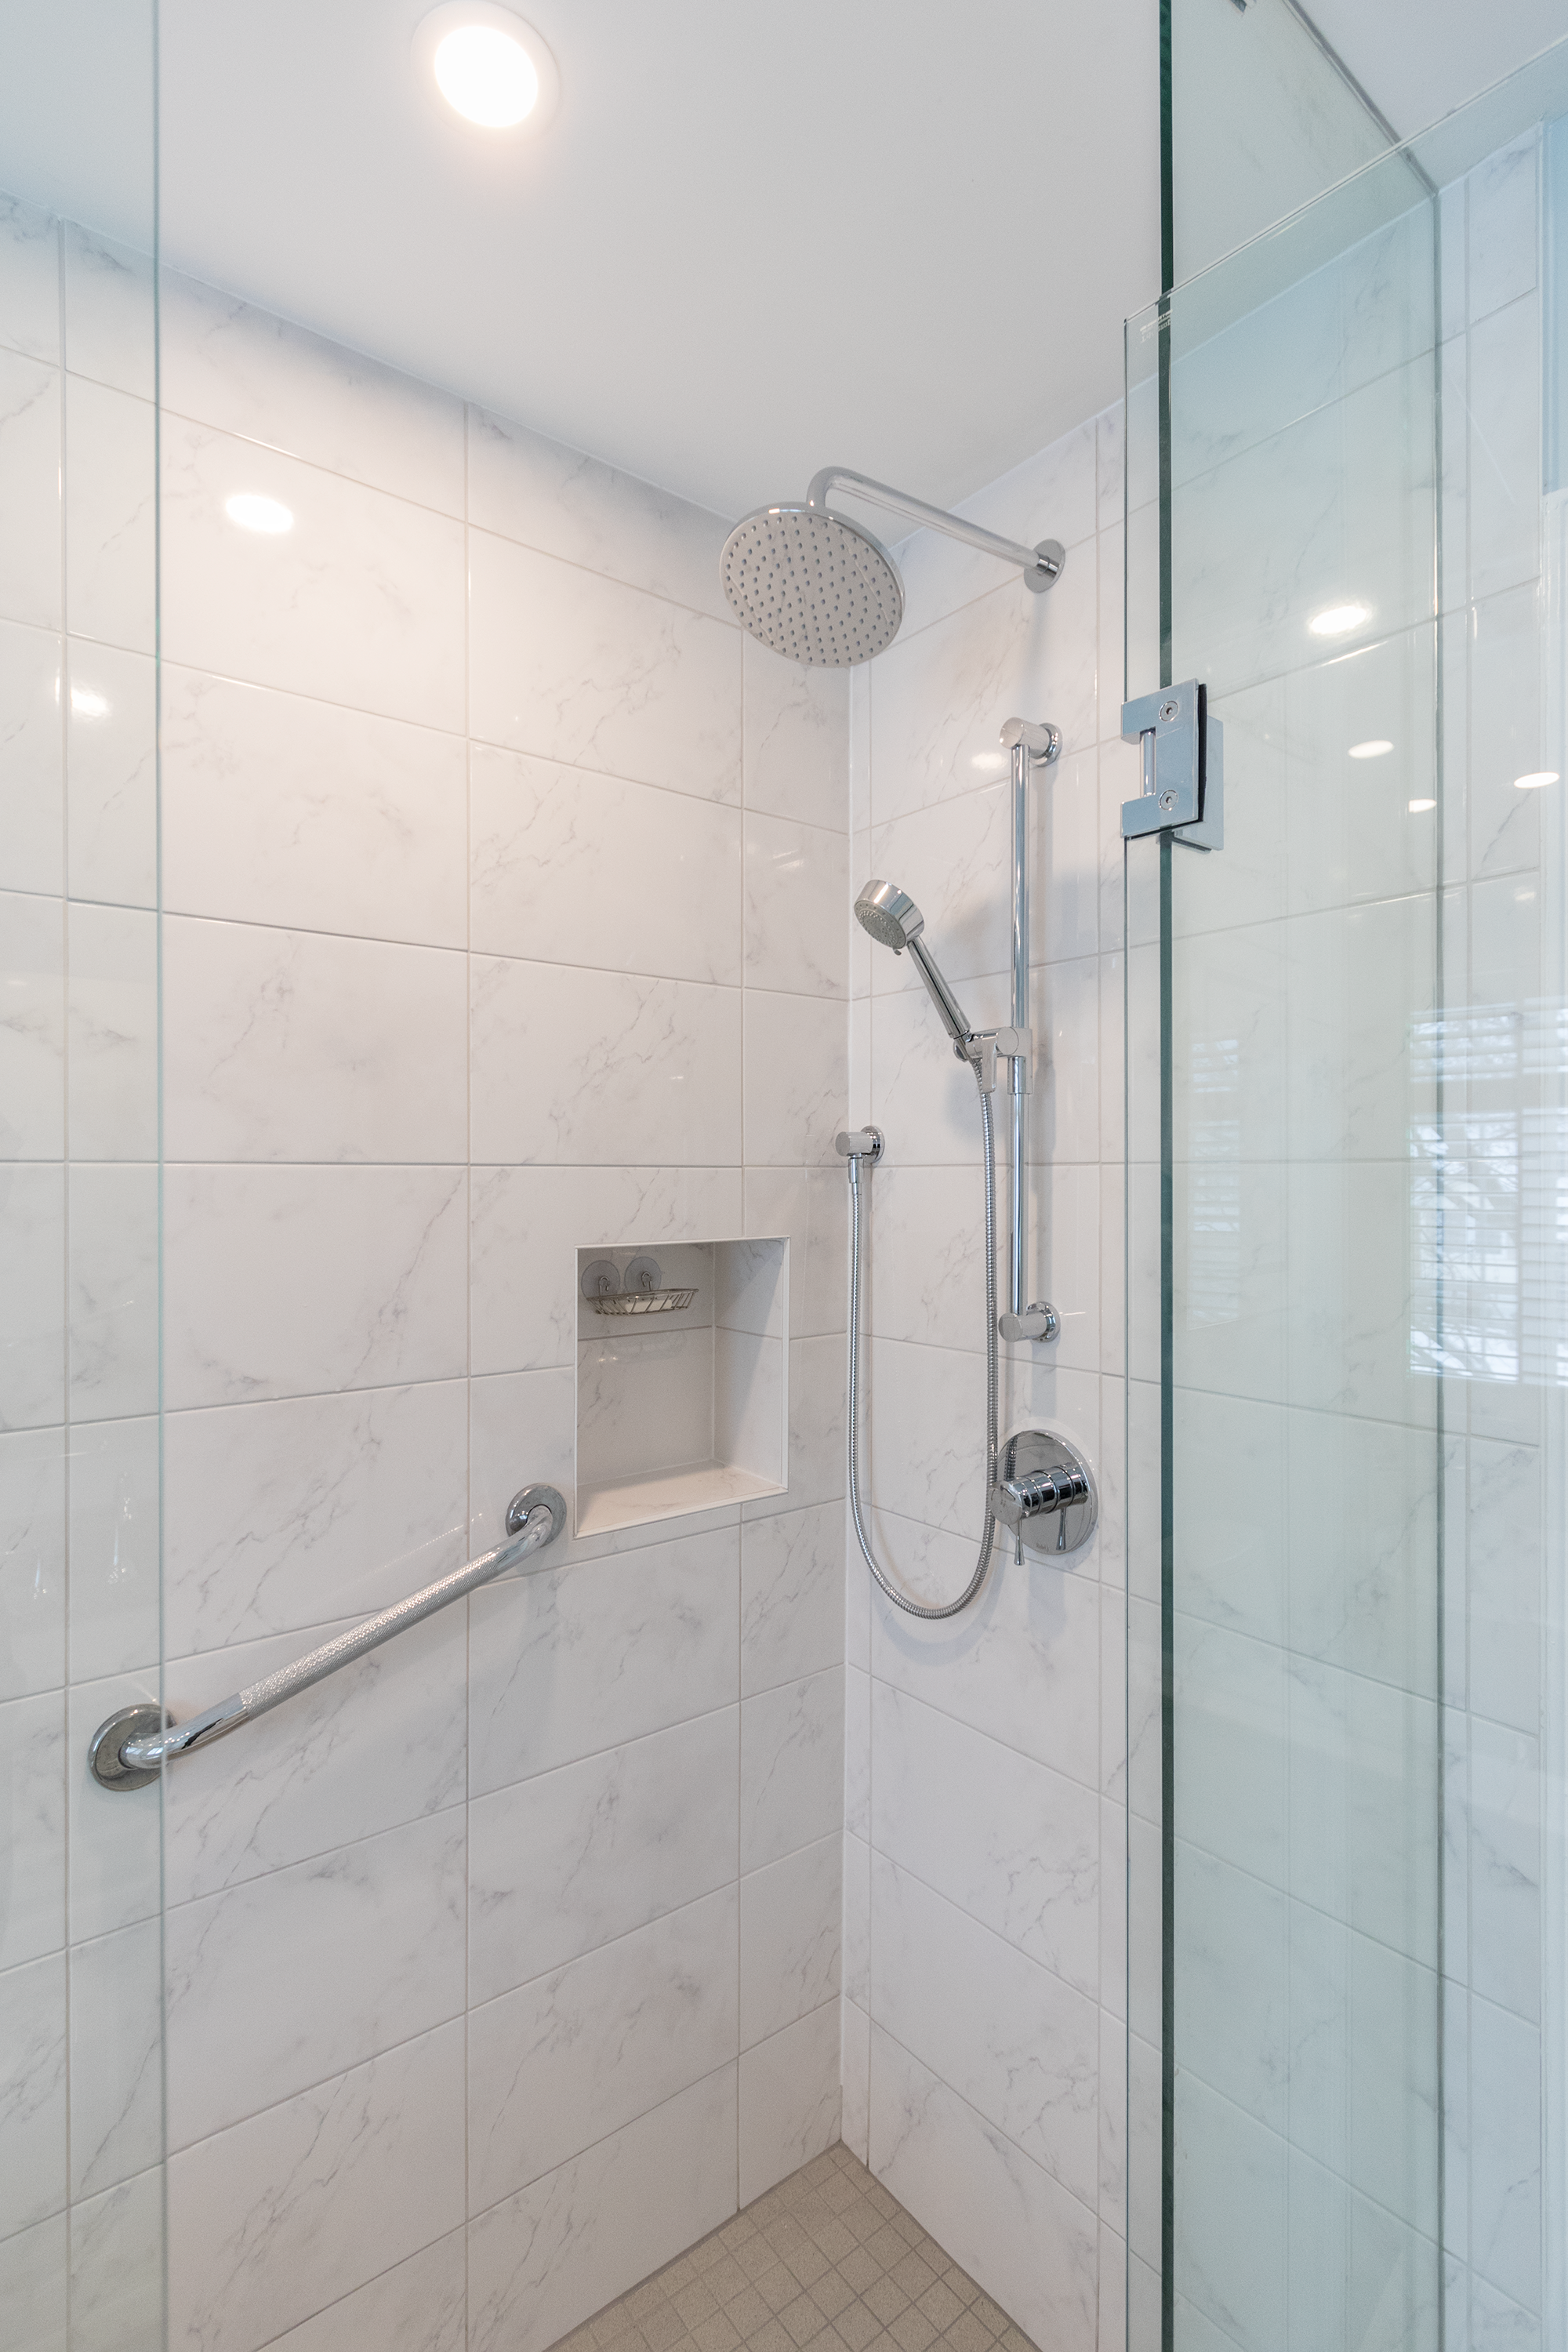 Converting Your Tub To A Walk In Shower, Walk In Tile Showers